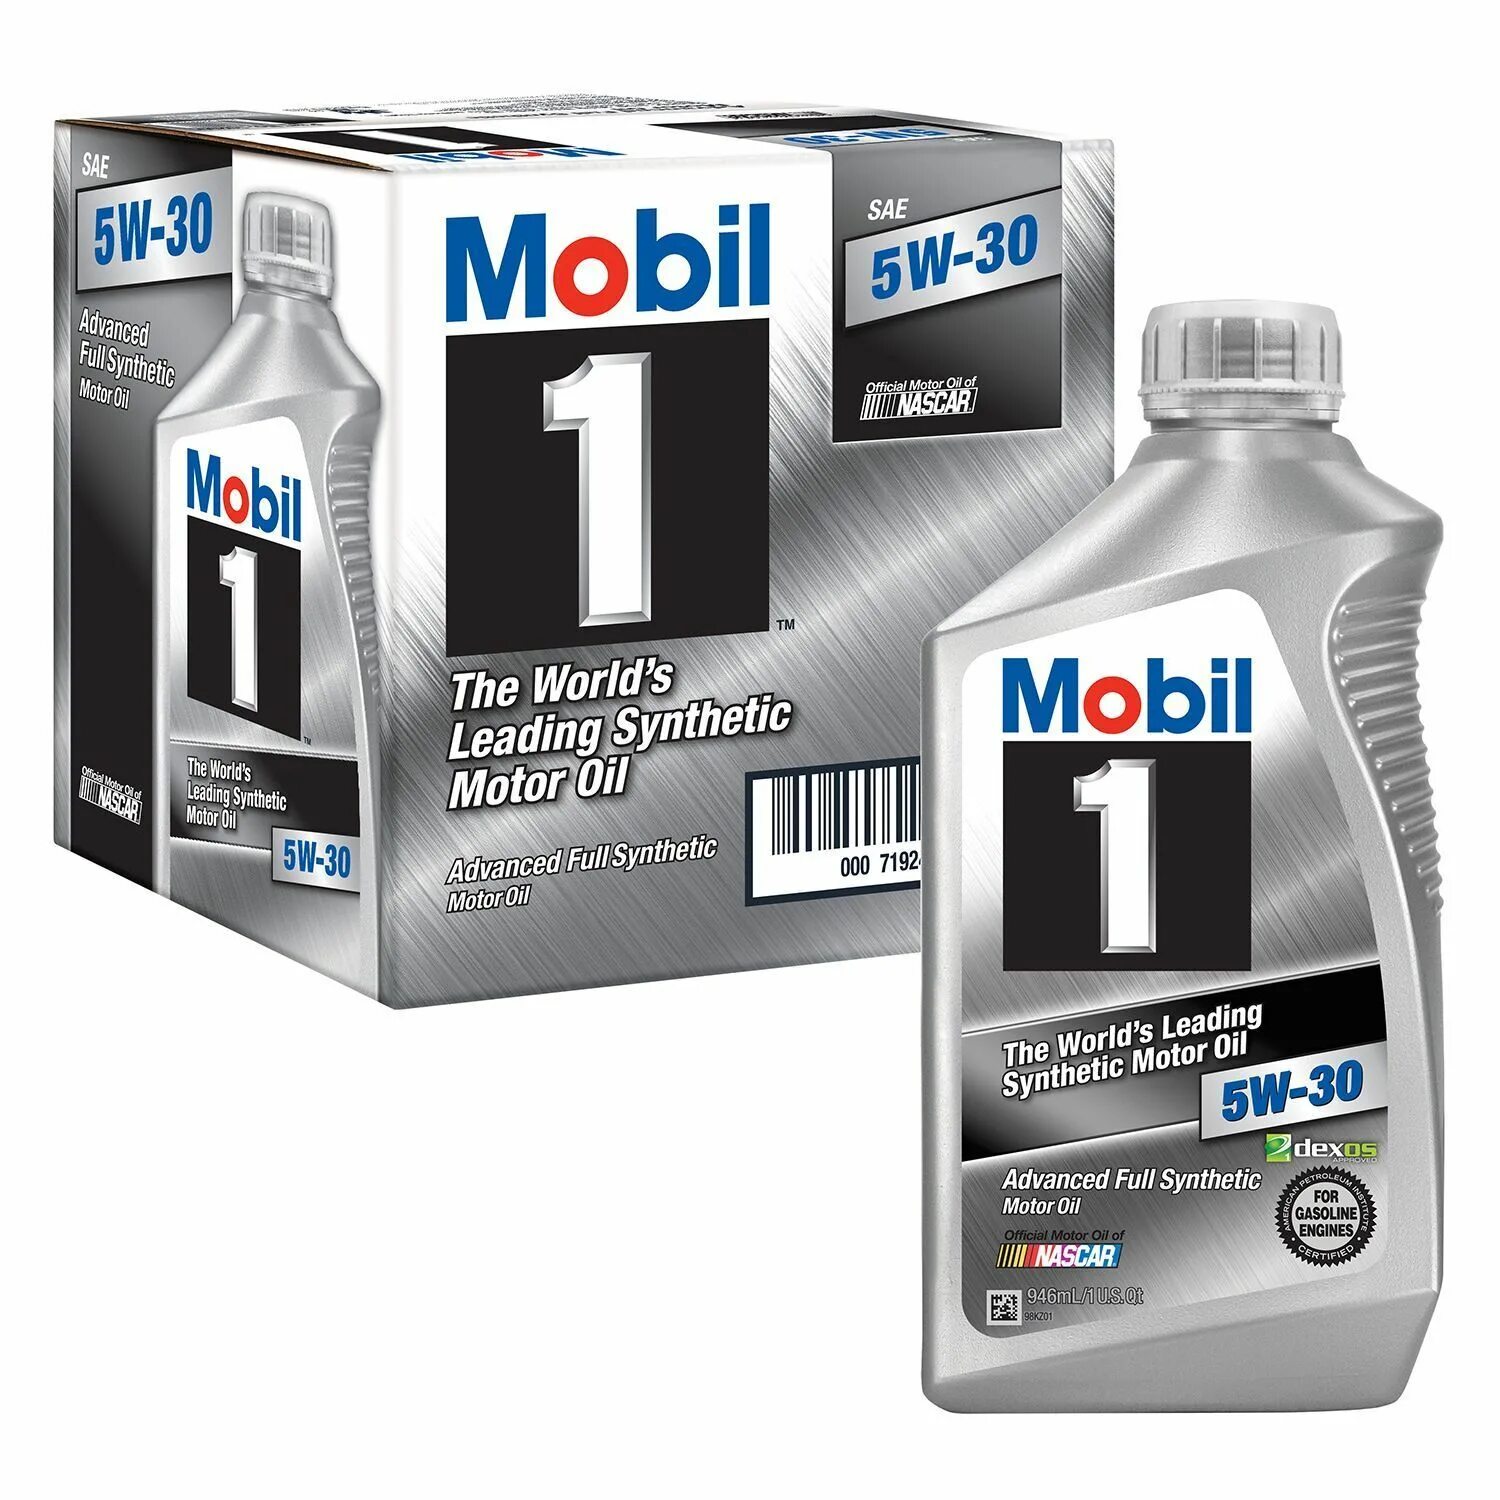 Mobil 1 x1 5w-30. Mobil 1 Advanced Full Synthetic 5w30. Mobil 1 Full Synthetic 5w-30. Mobil 1 ESP 5w30 GSP. Масло мобил 1 5